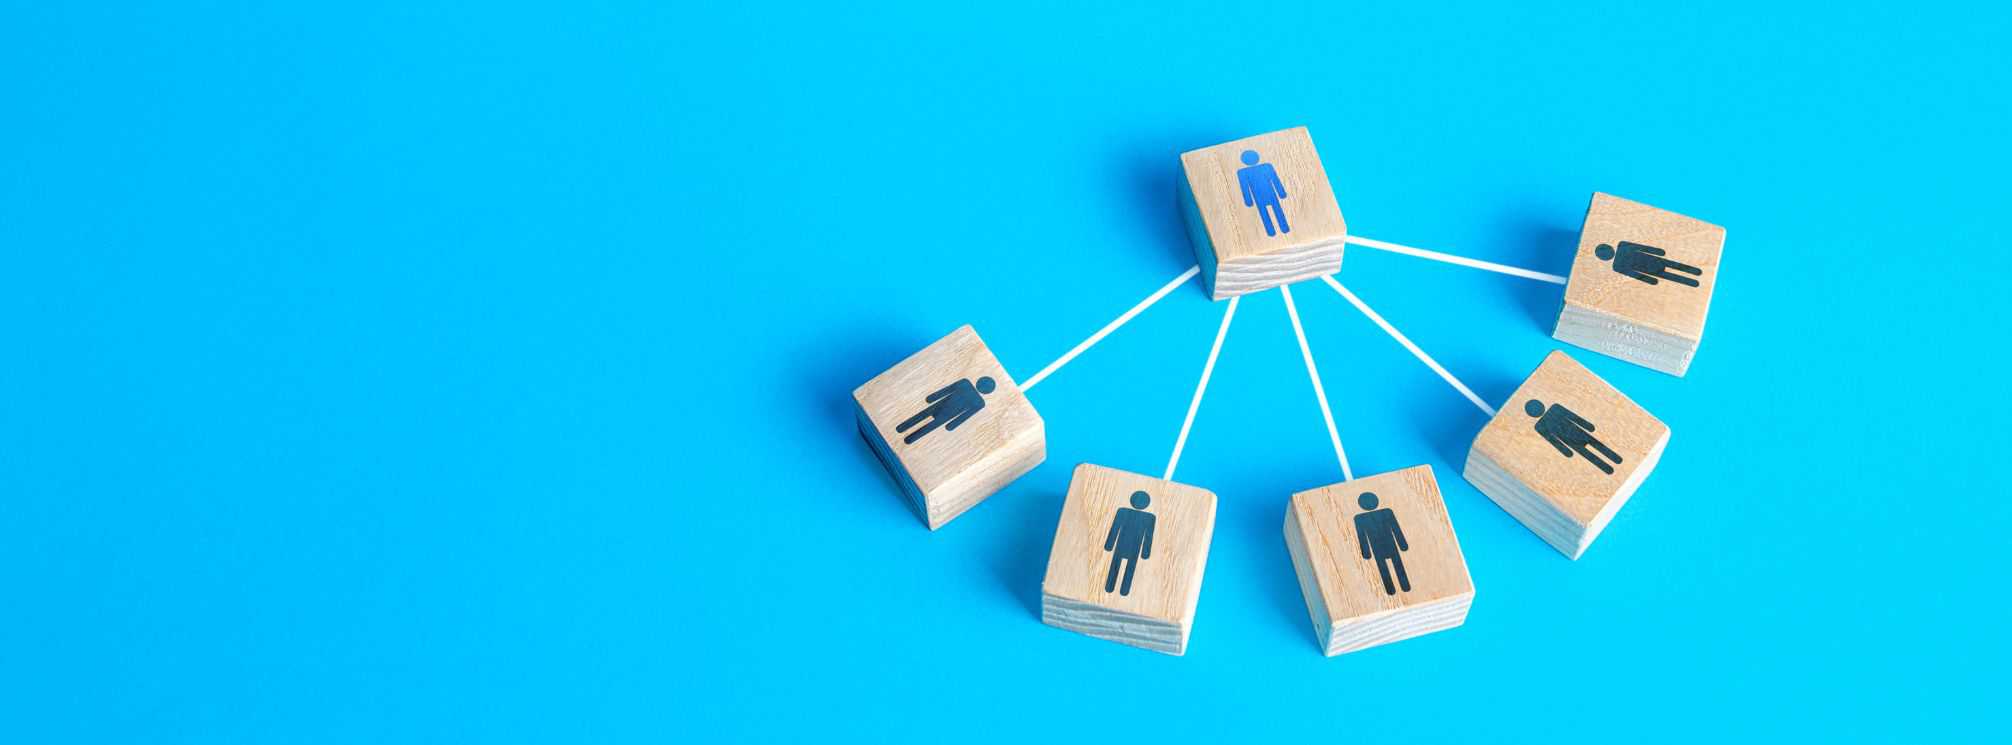 wooden blocks with people icons on them arranged with five connecting into one. This represents a manager and their direct reports.